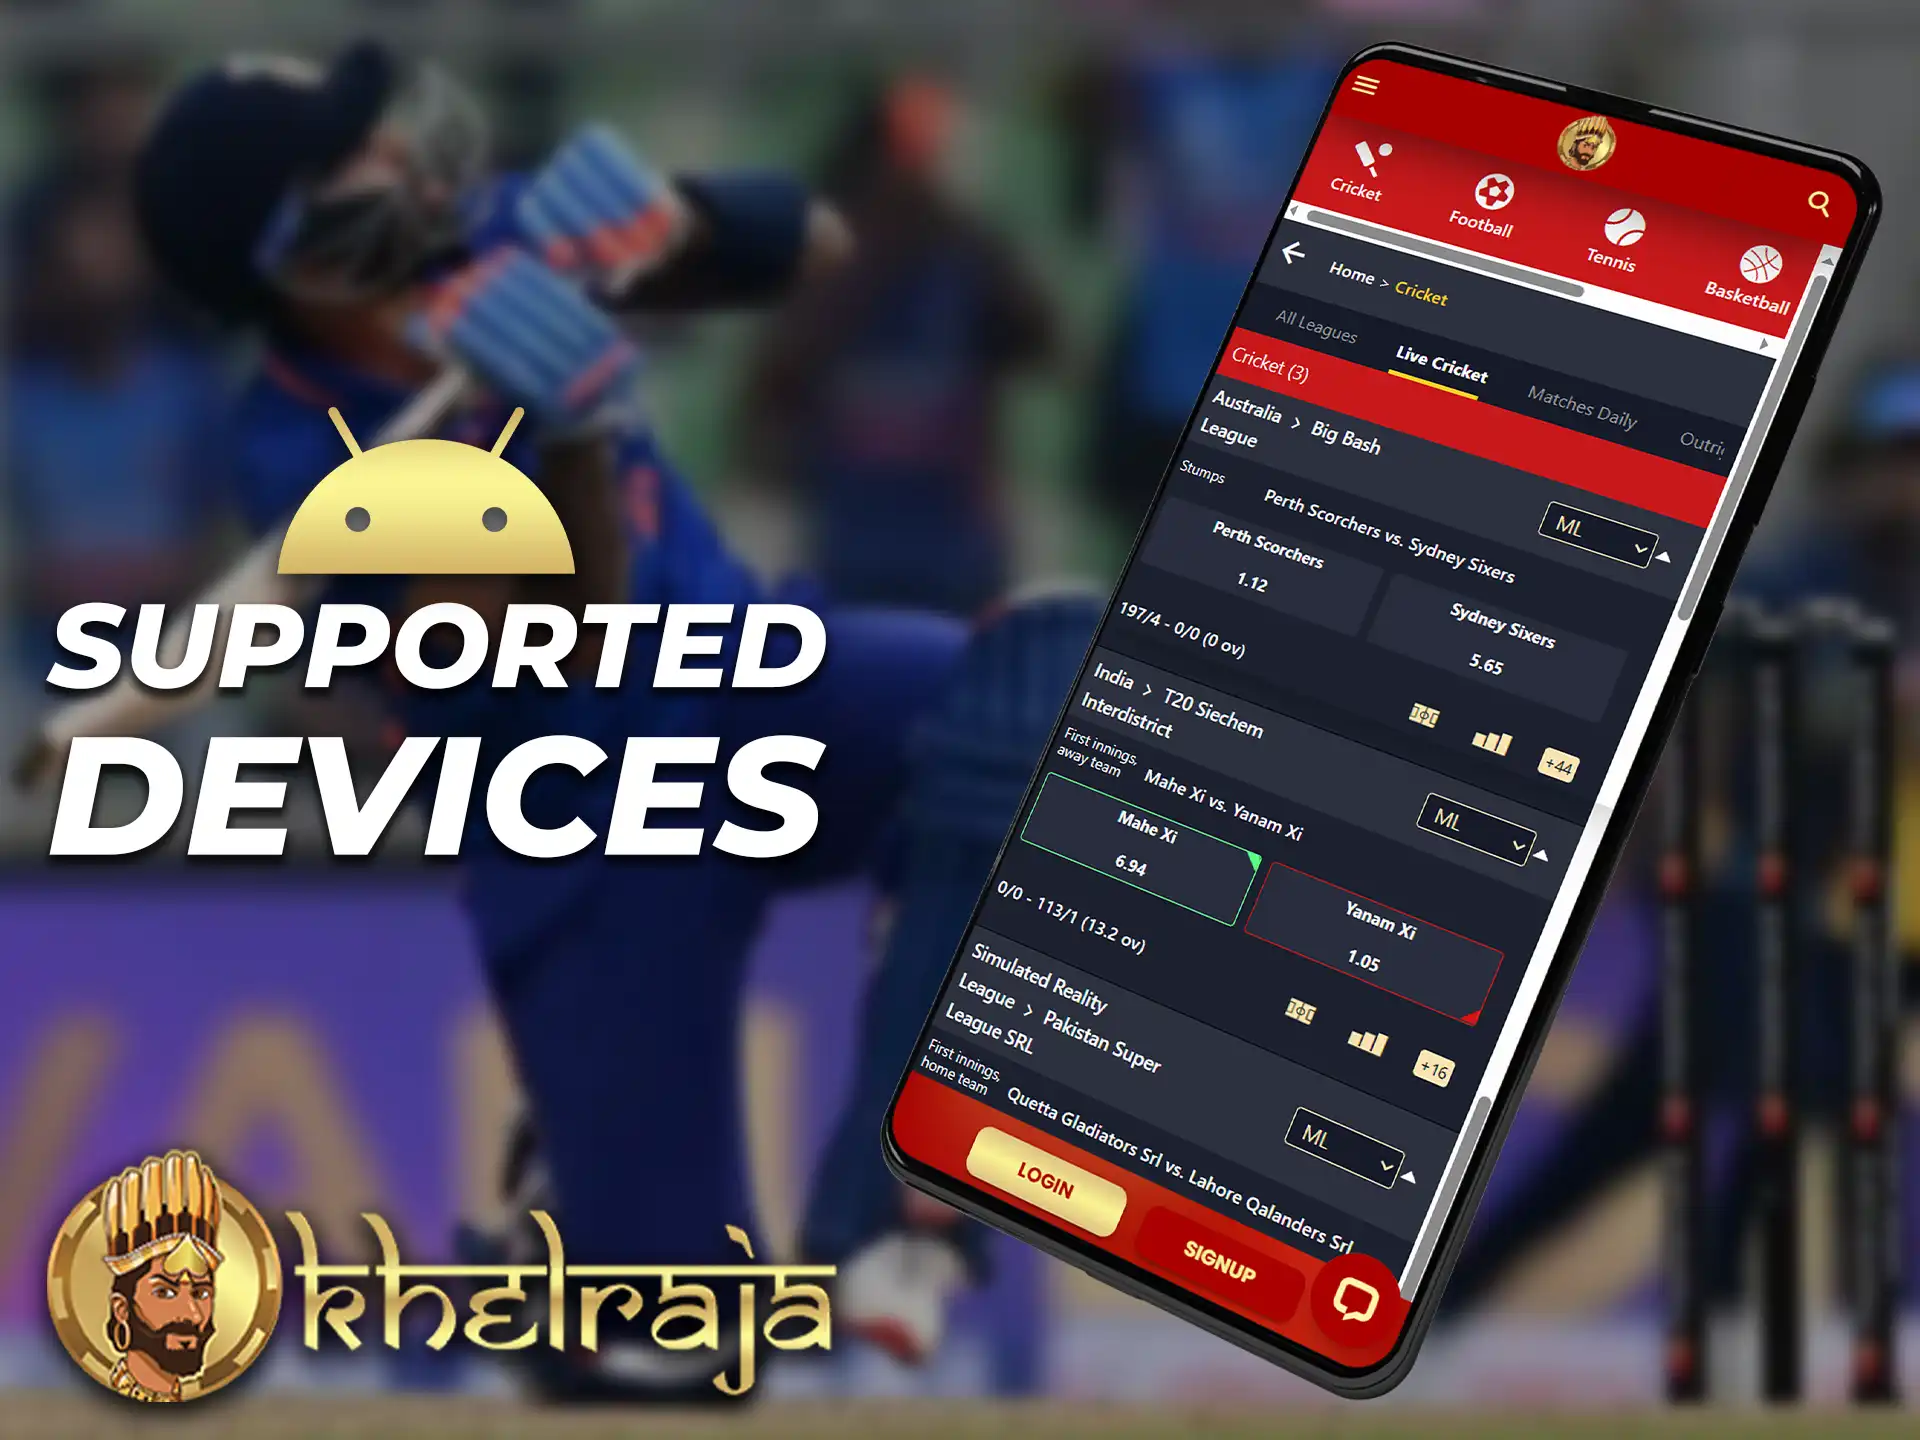 List of compatible Android devices with Khelraja app.